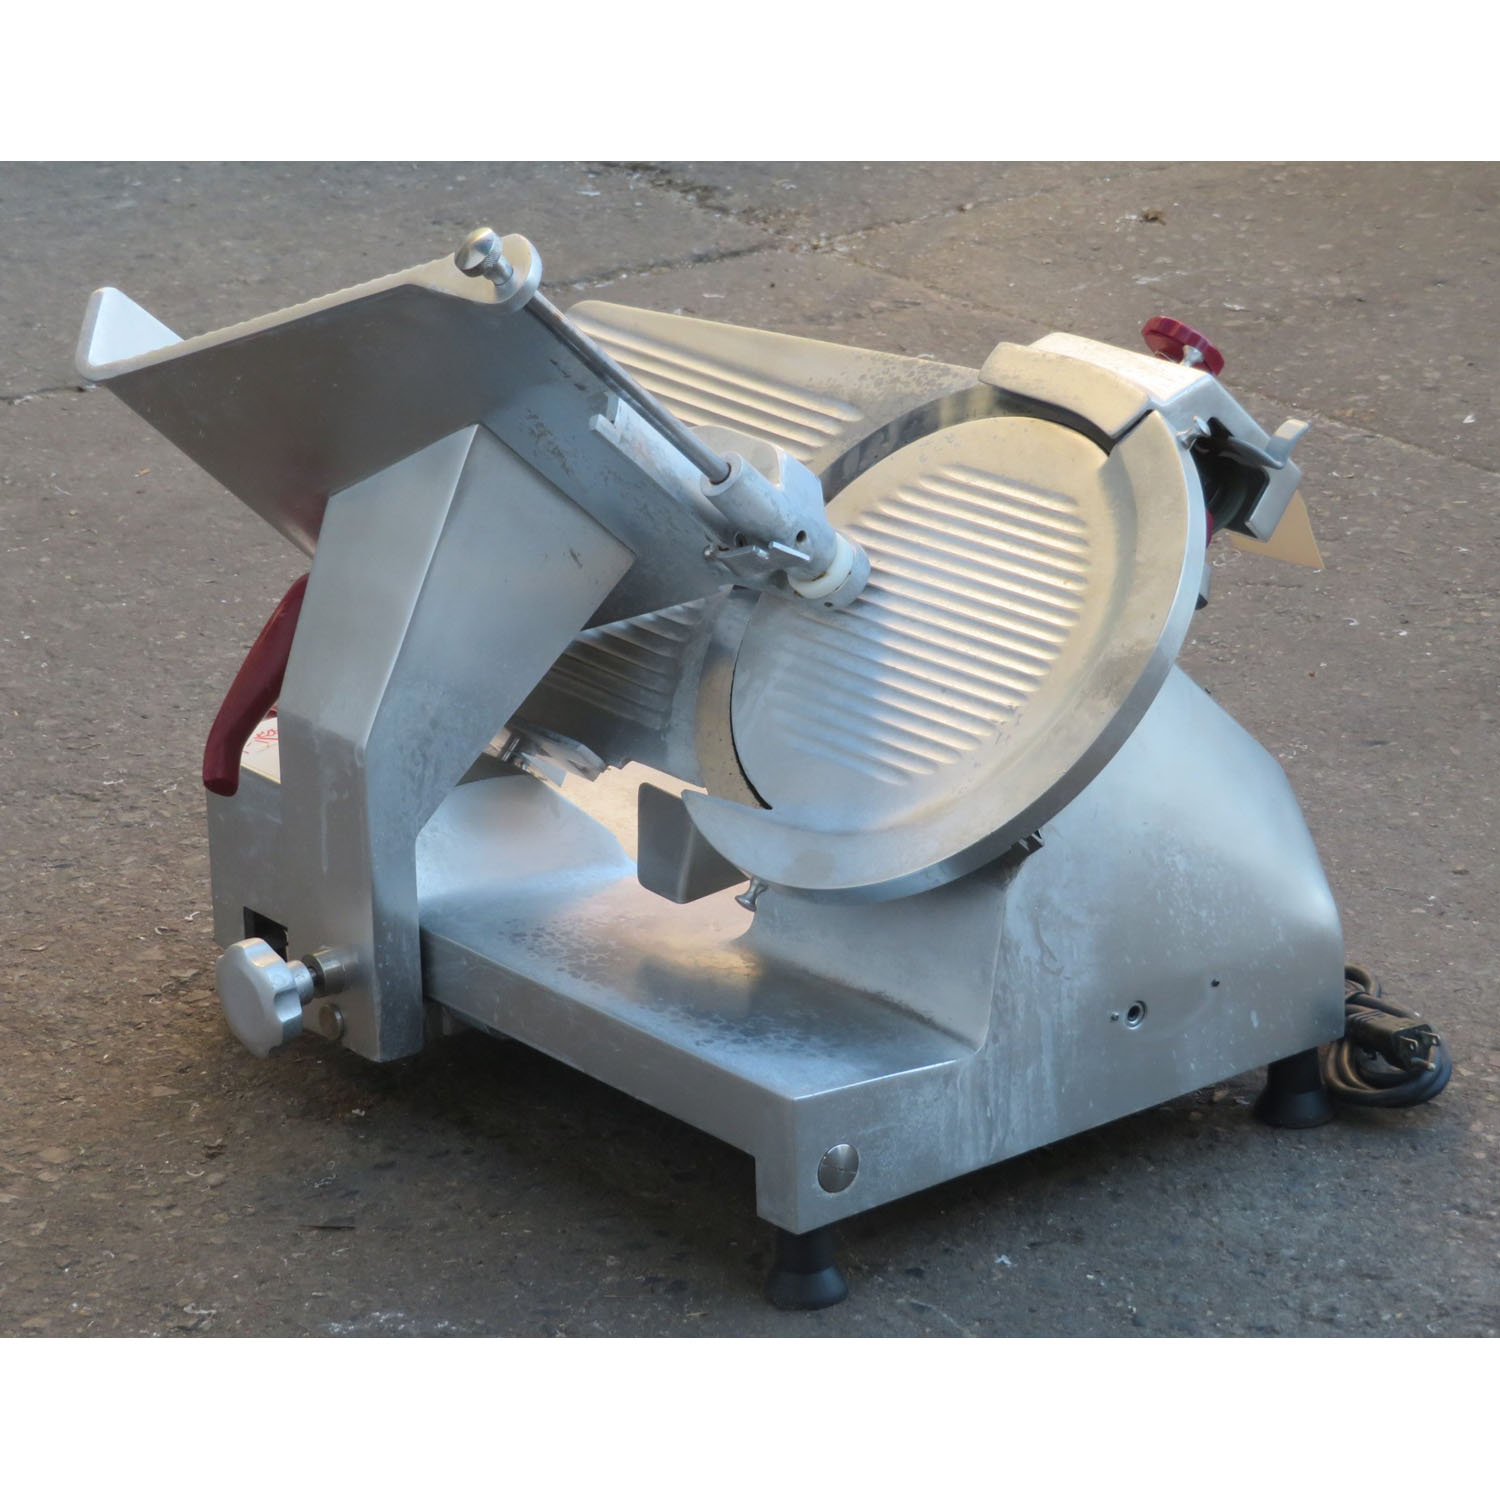 Fleetwood 312 Meat Slicer, Used Great Condition image 4